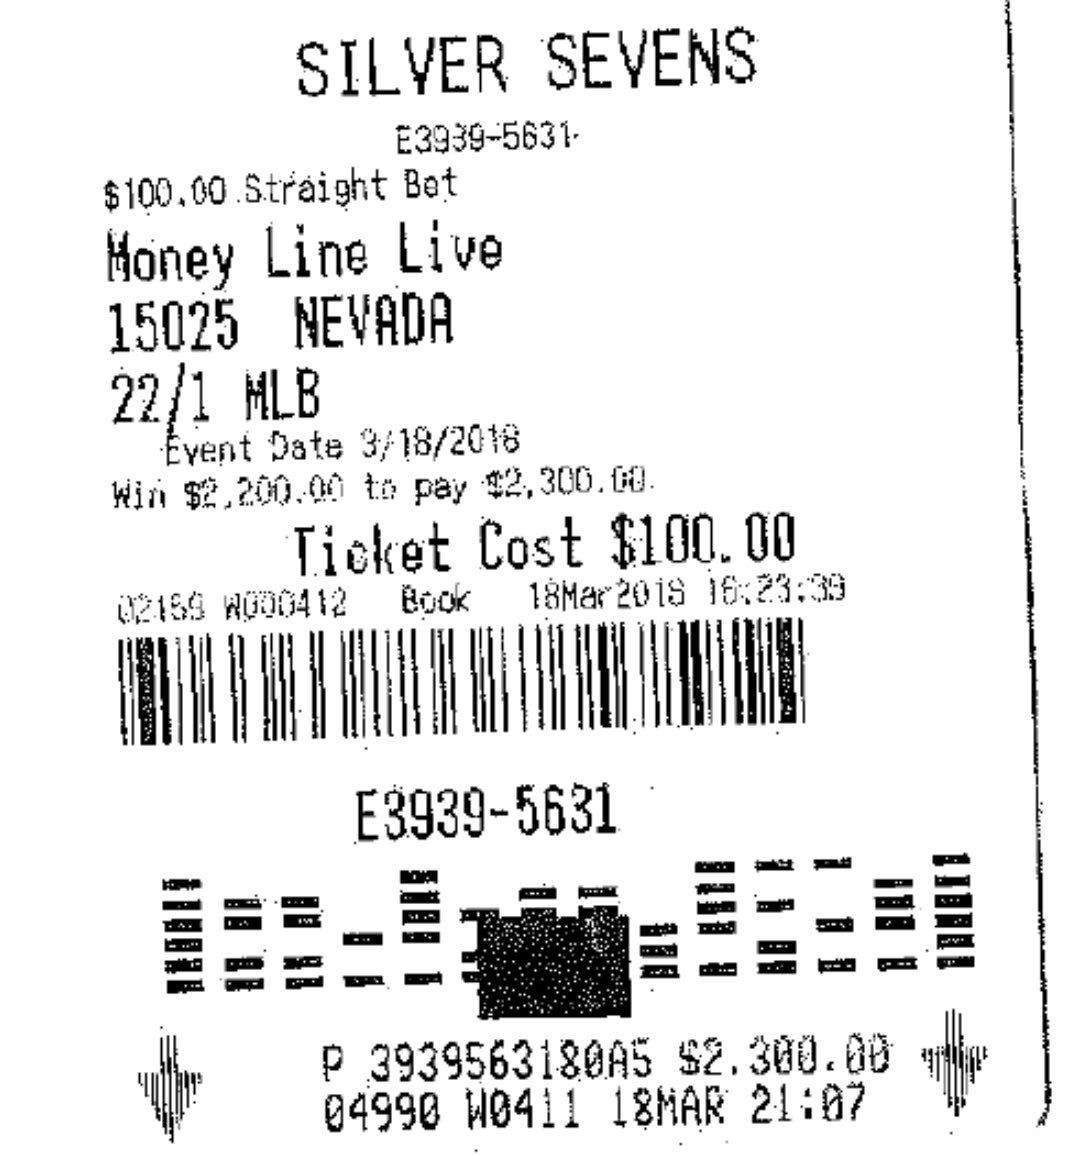 Darren Rovell With Cincinnati Up 65 43 A Bettor For Some Crazy Reason Bet On Nevada To Come Back And Win When They Did His 100 Bet Turned Into